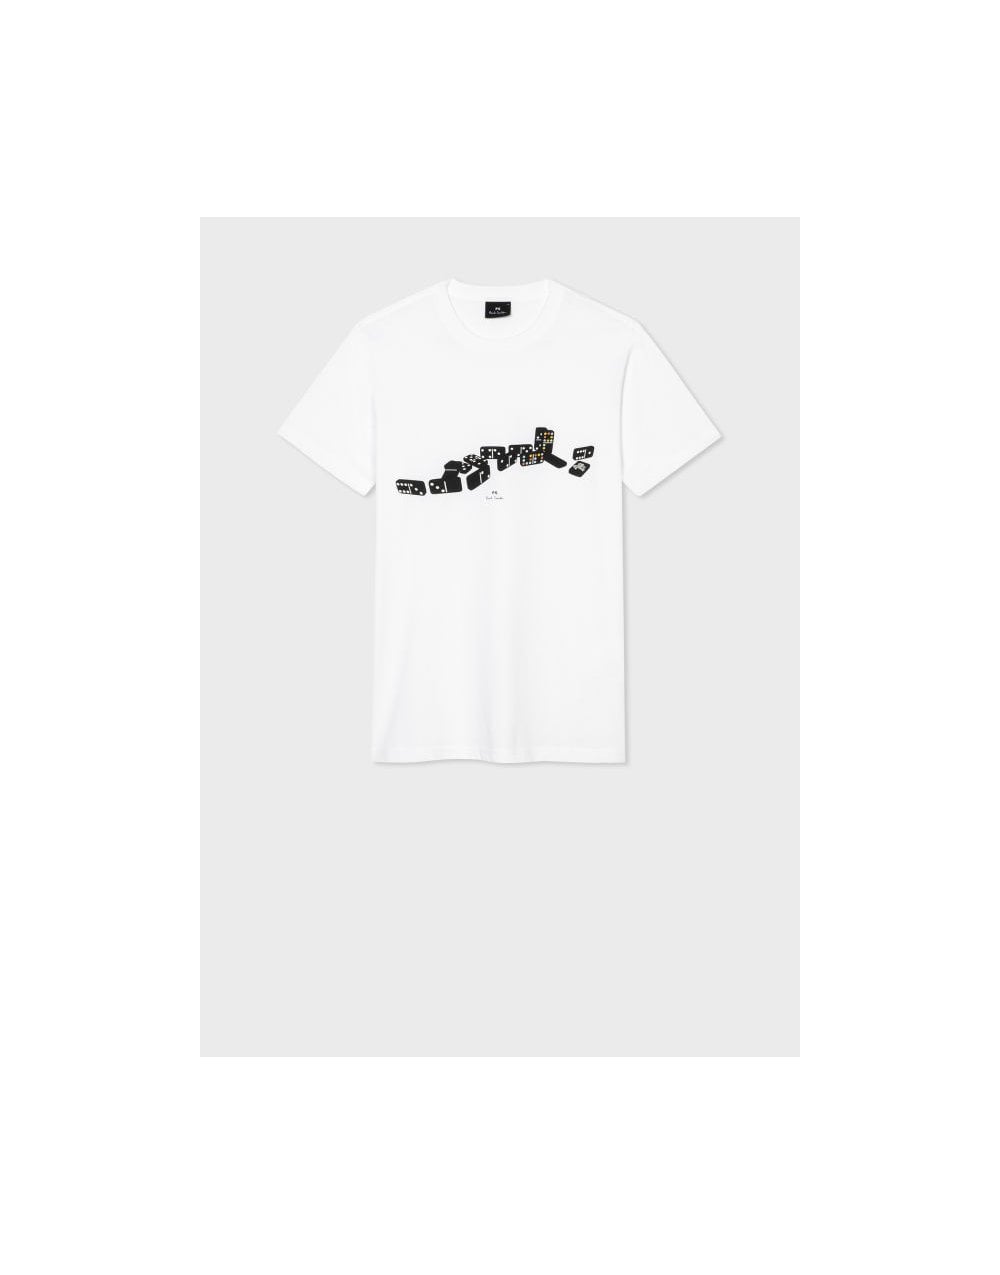 Paul Smith Dominioes Graphic Print T-Shirt Col: 01 White